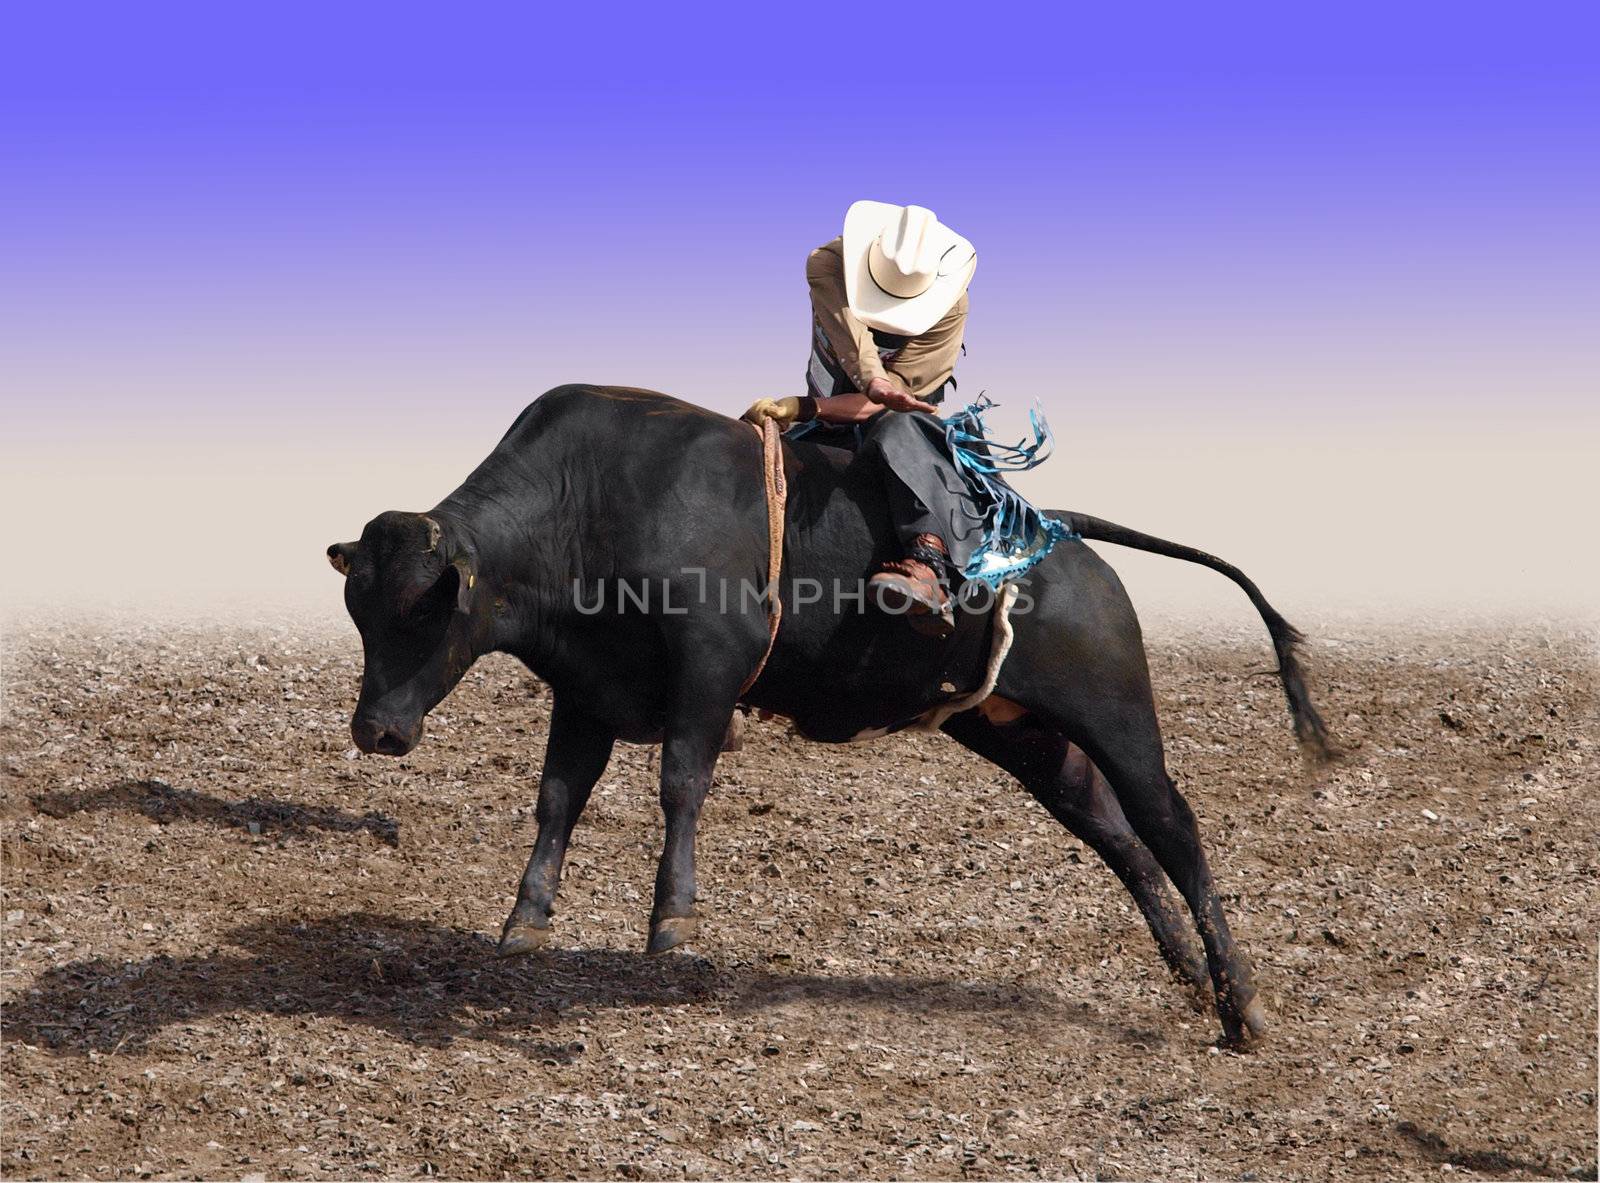 Cowboy Riding a Bull with partial isolation      